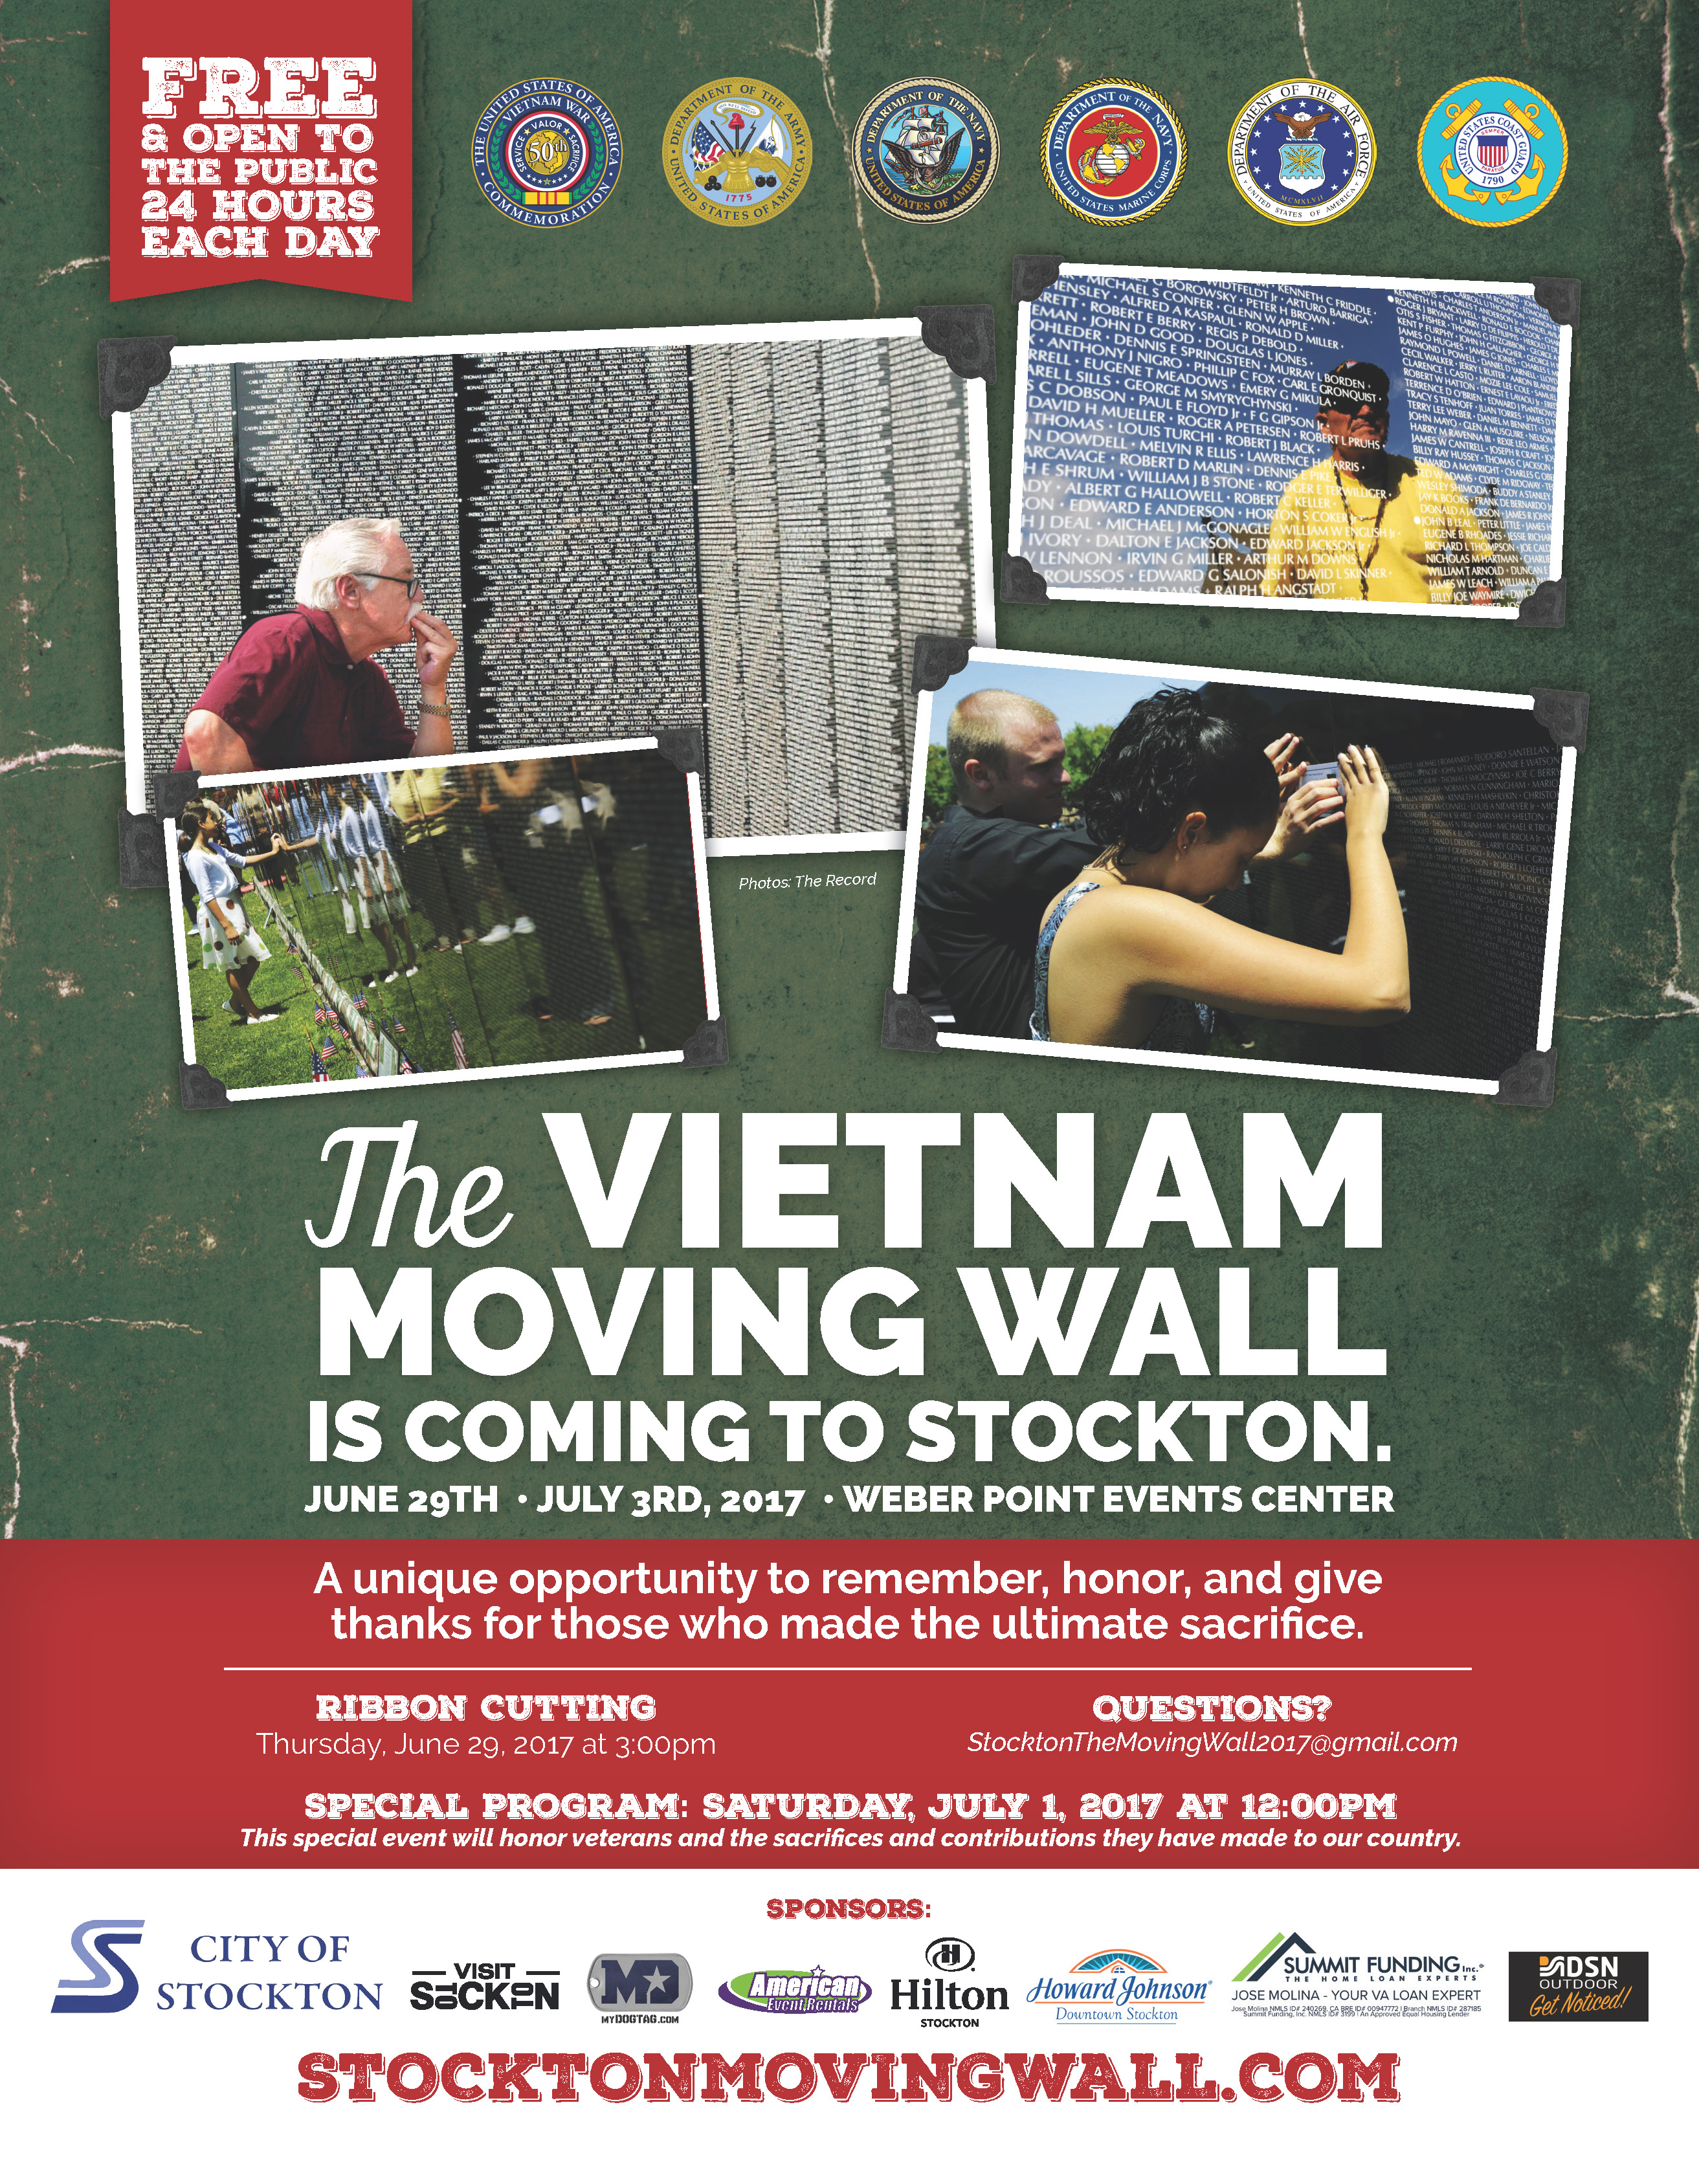 The Vietnam Moving Wall - Events - Visit Stockton